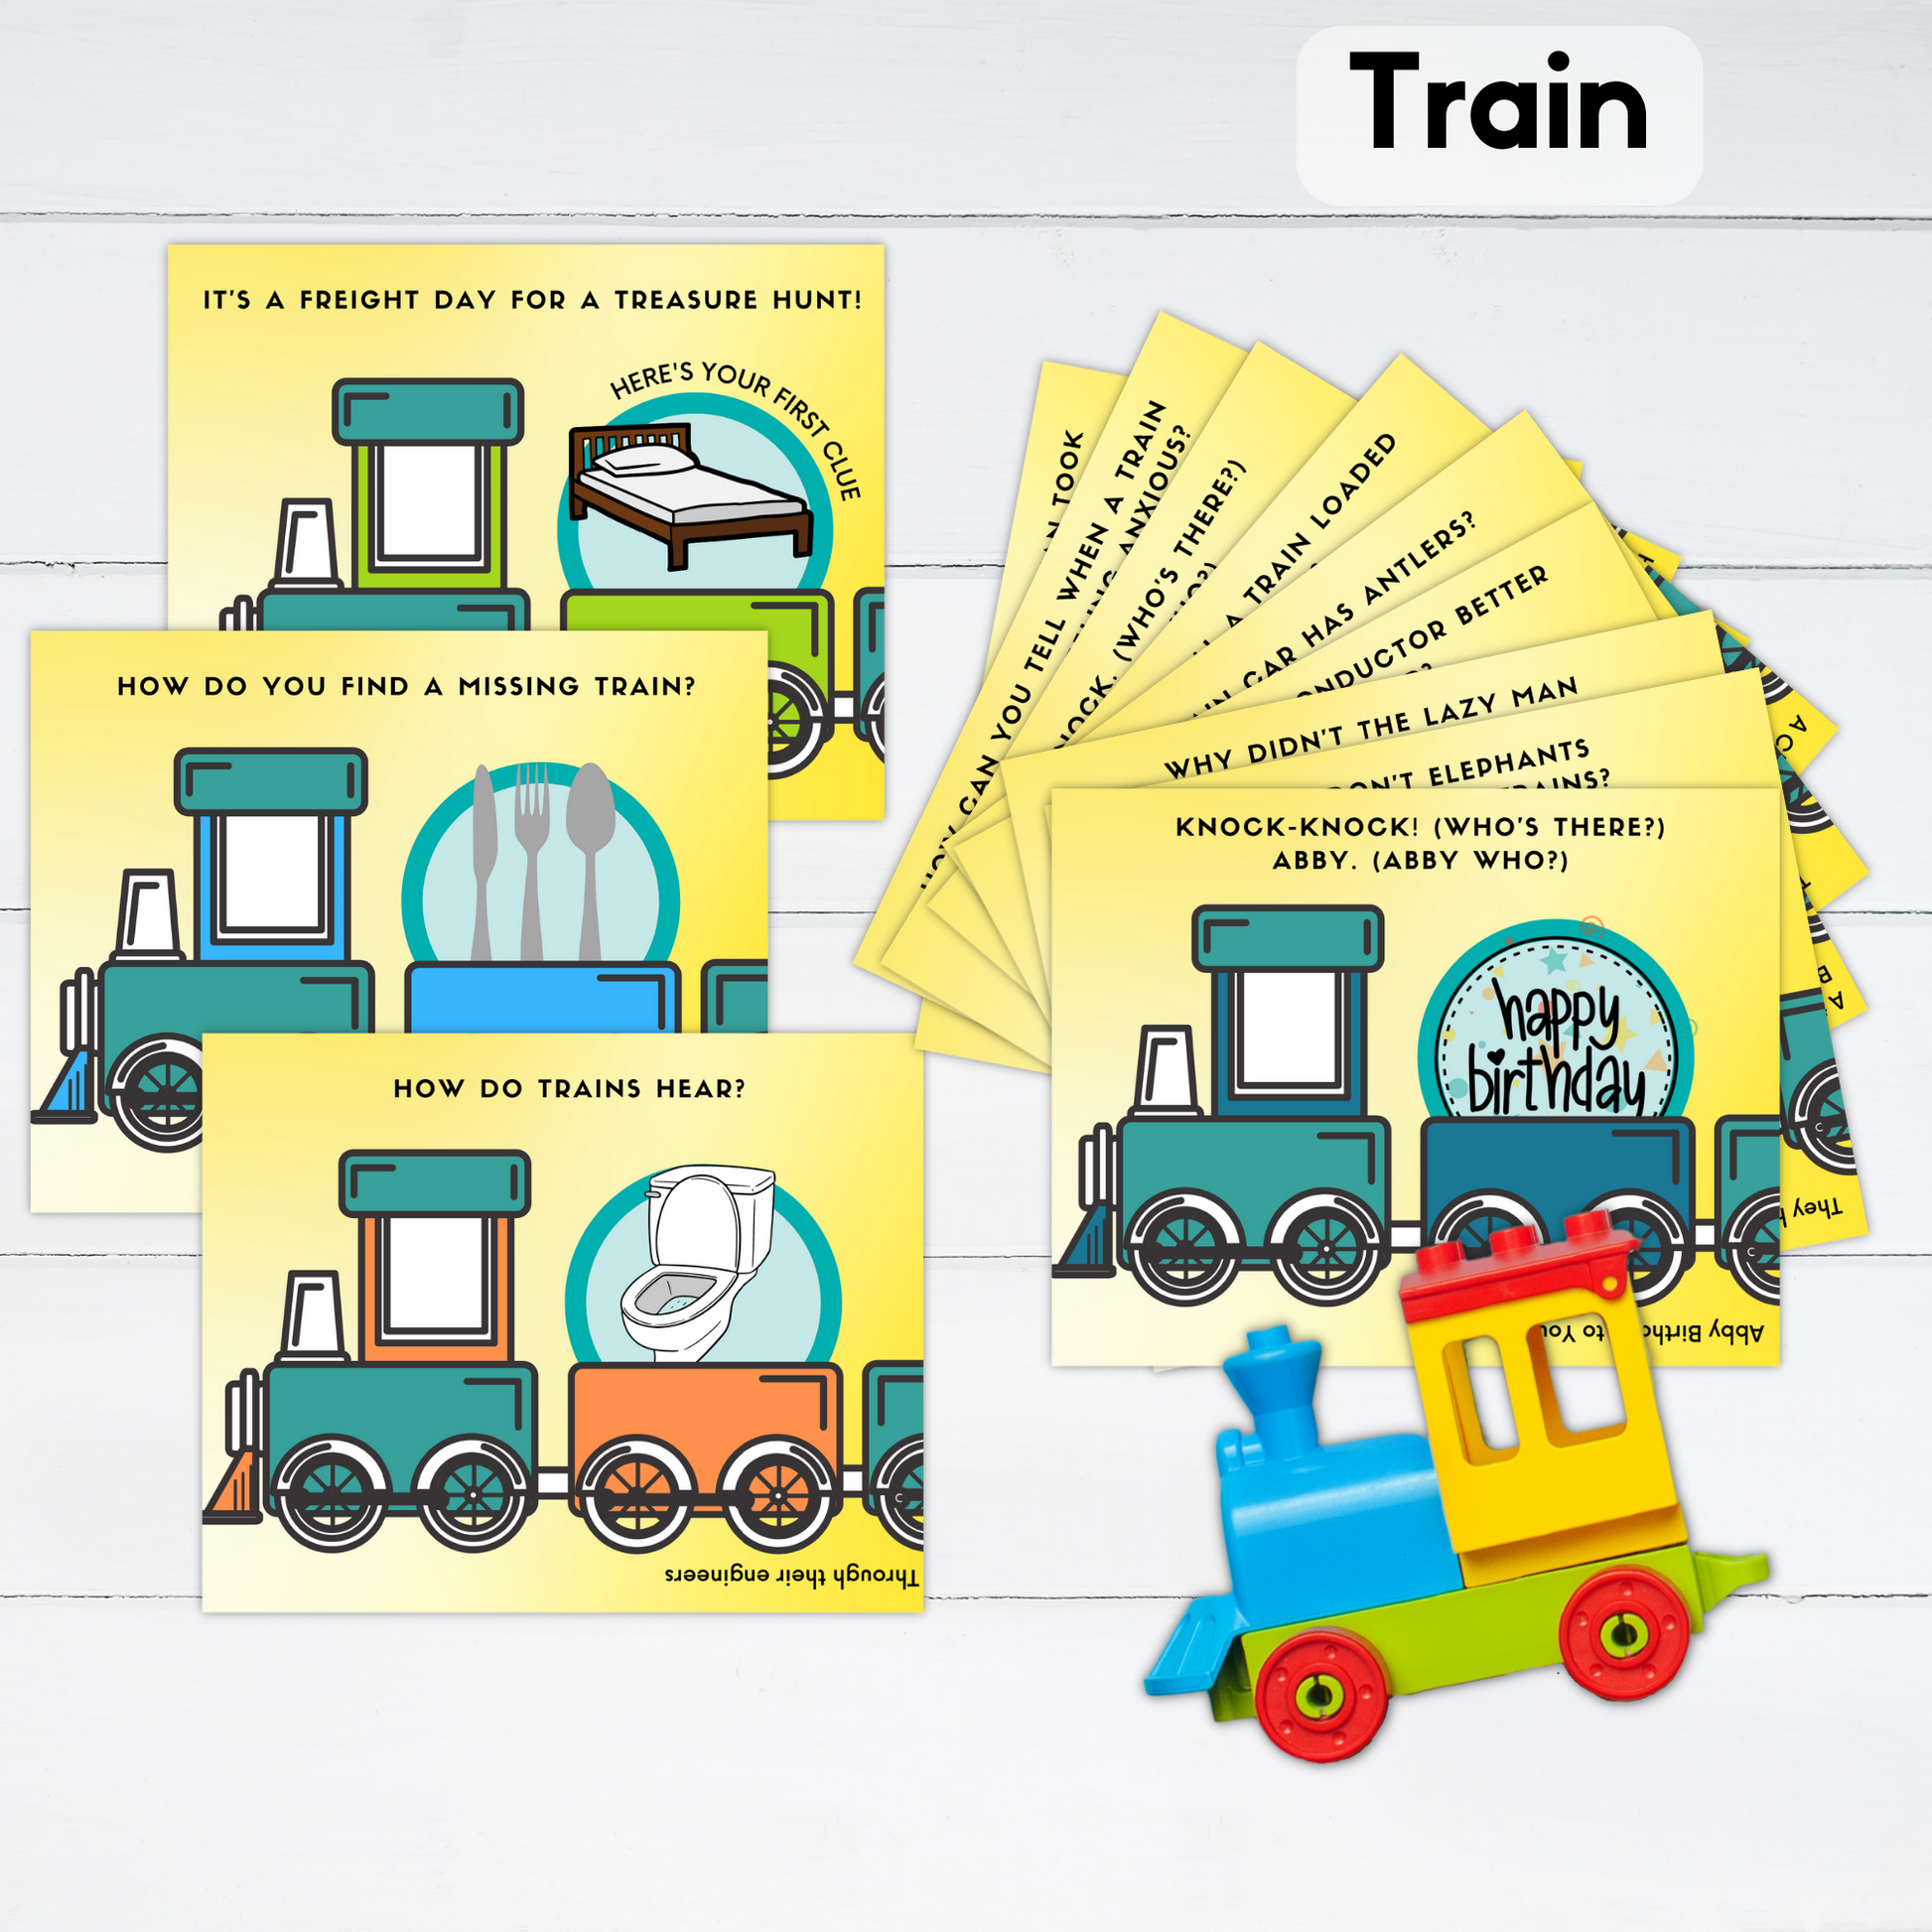 The cards for a train themed treasure hunt are displayed with a toy train.